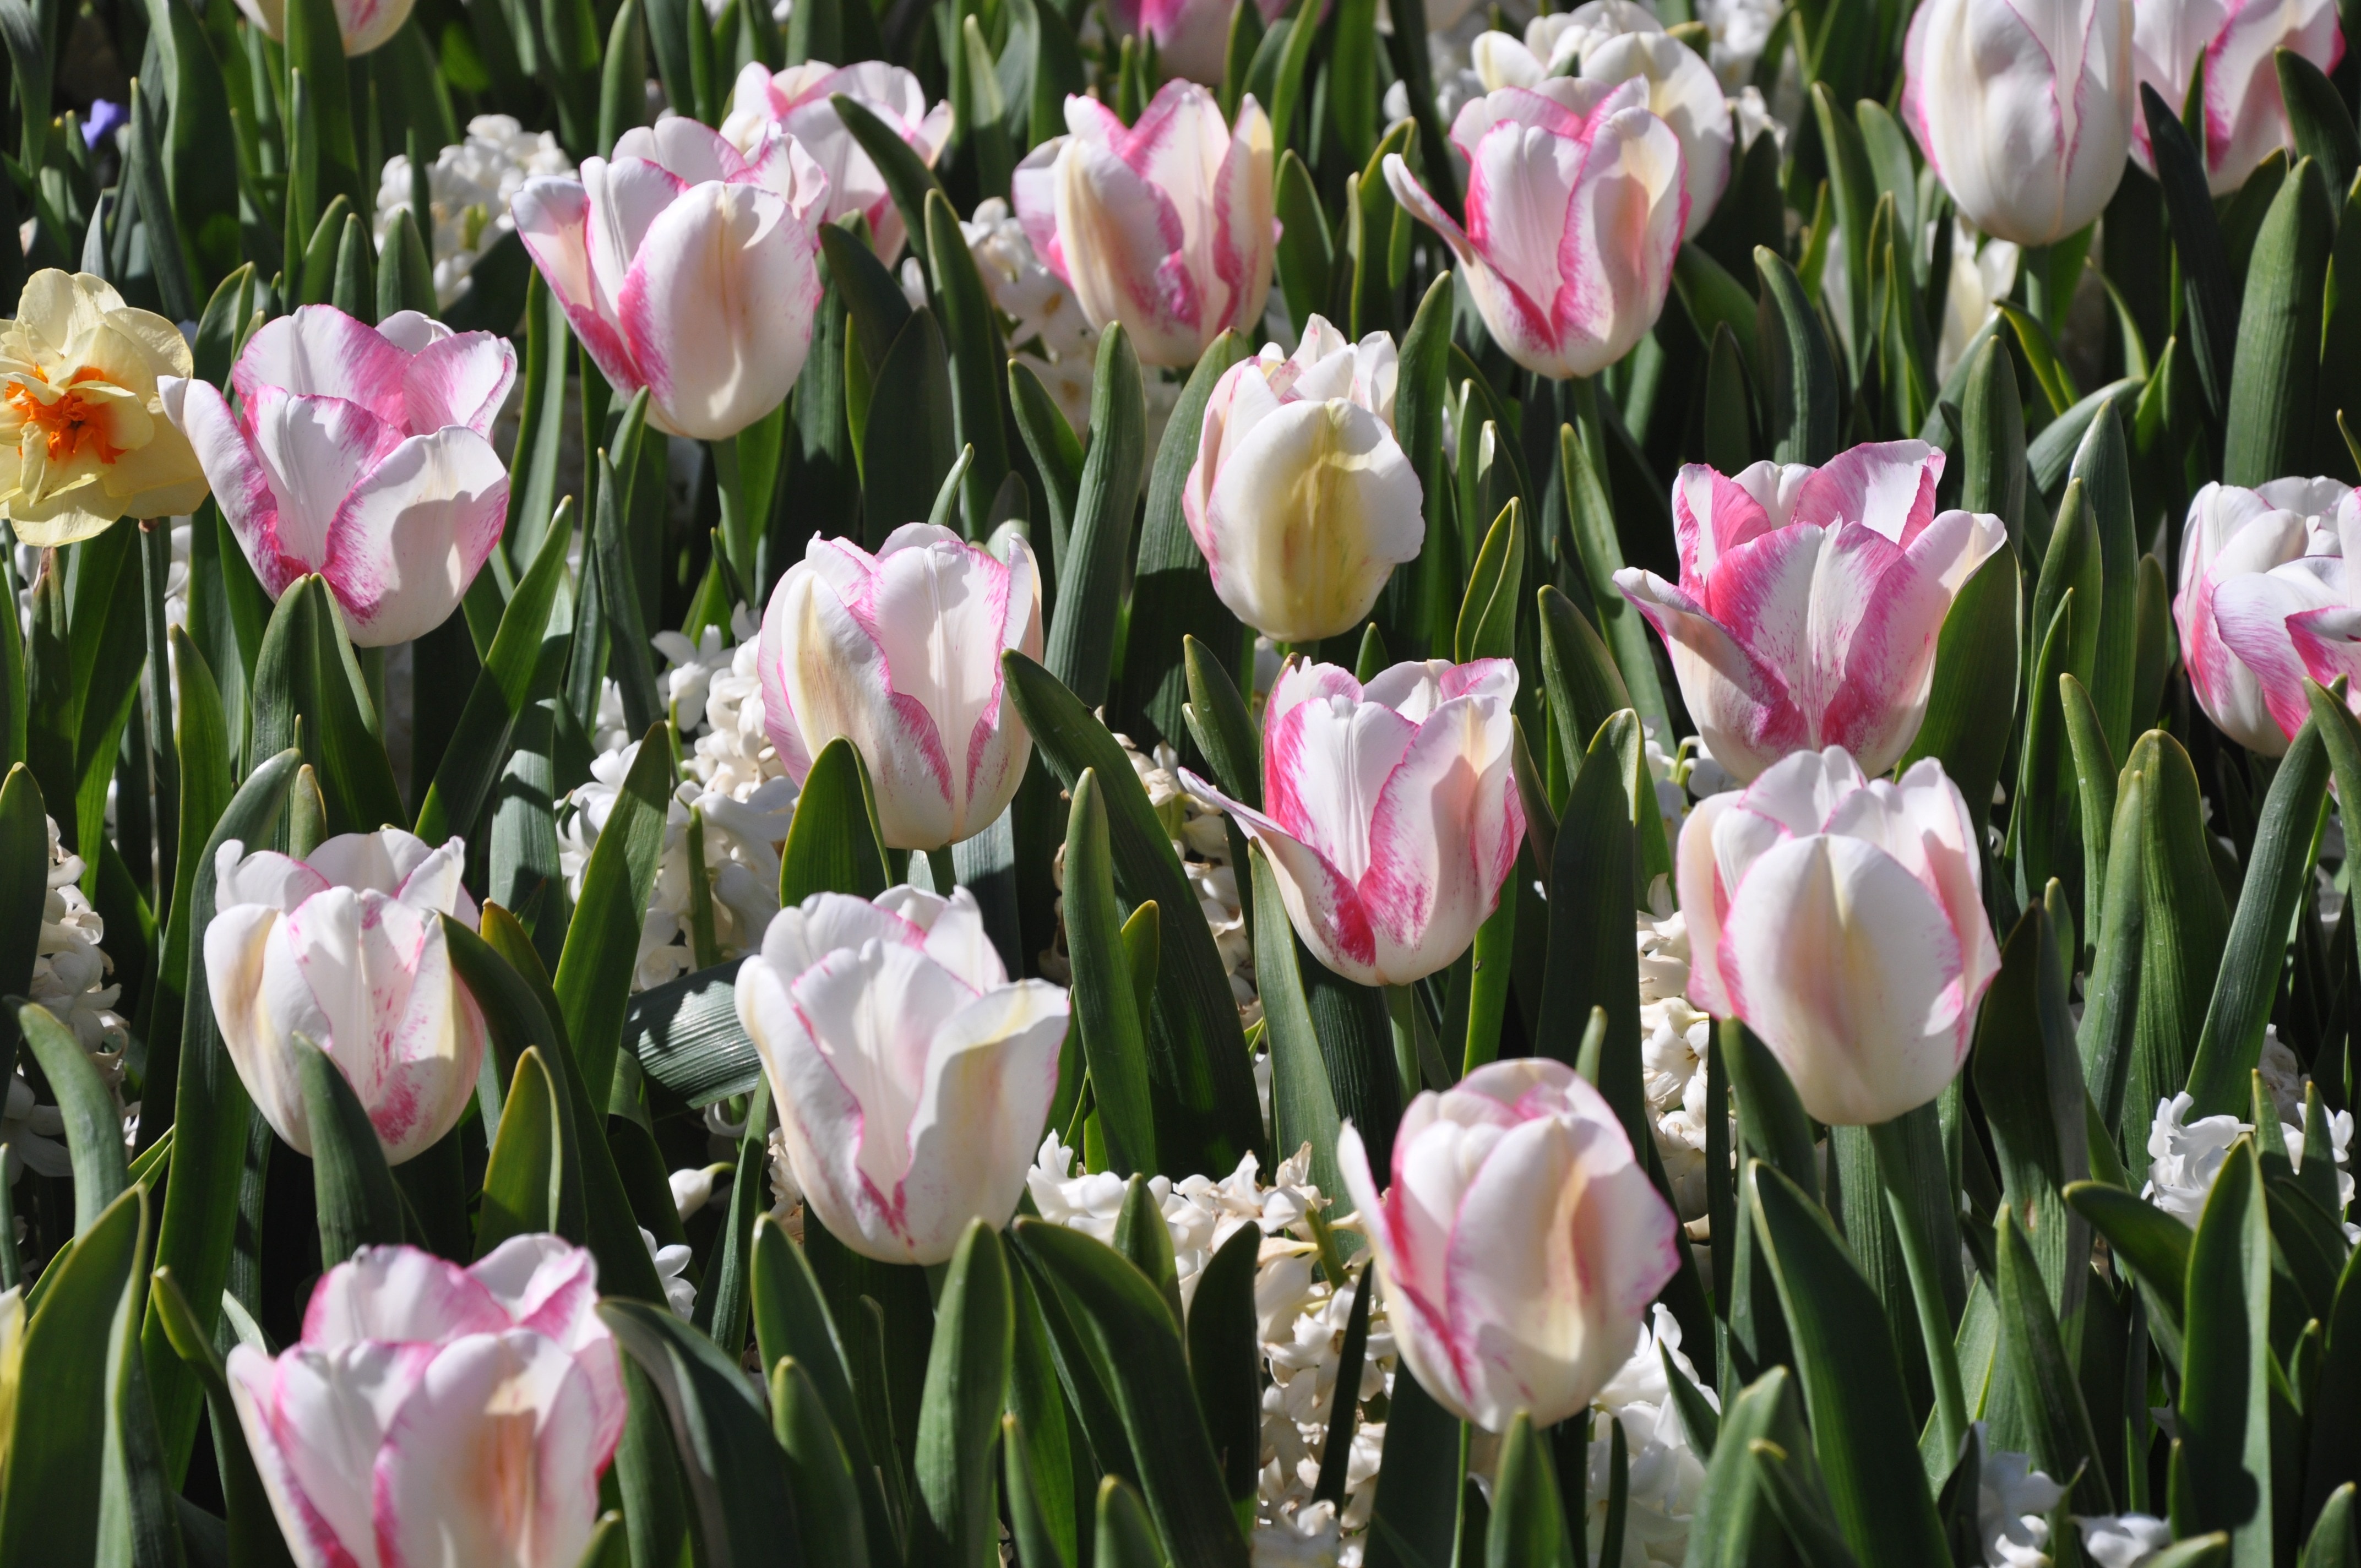 pink-and-white tulips at daytime